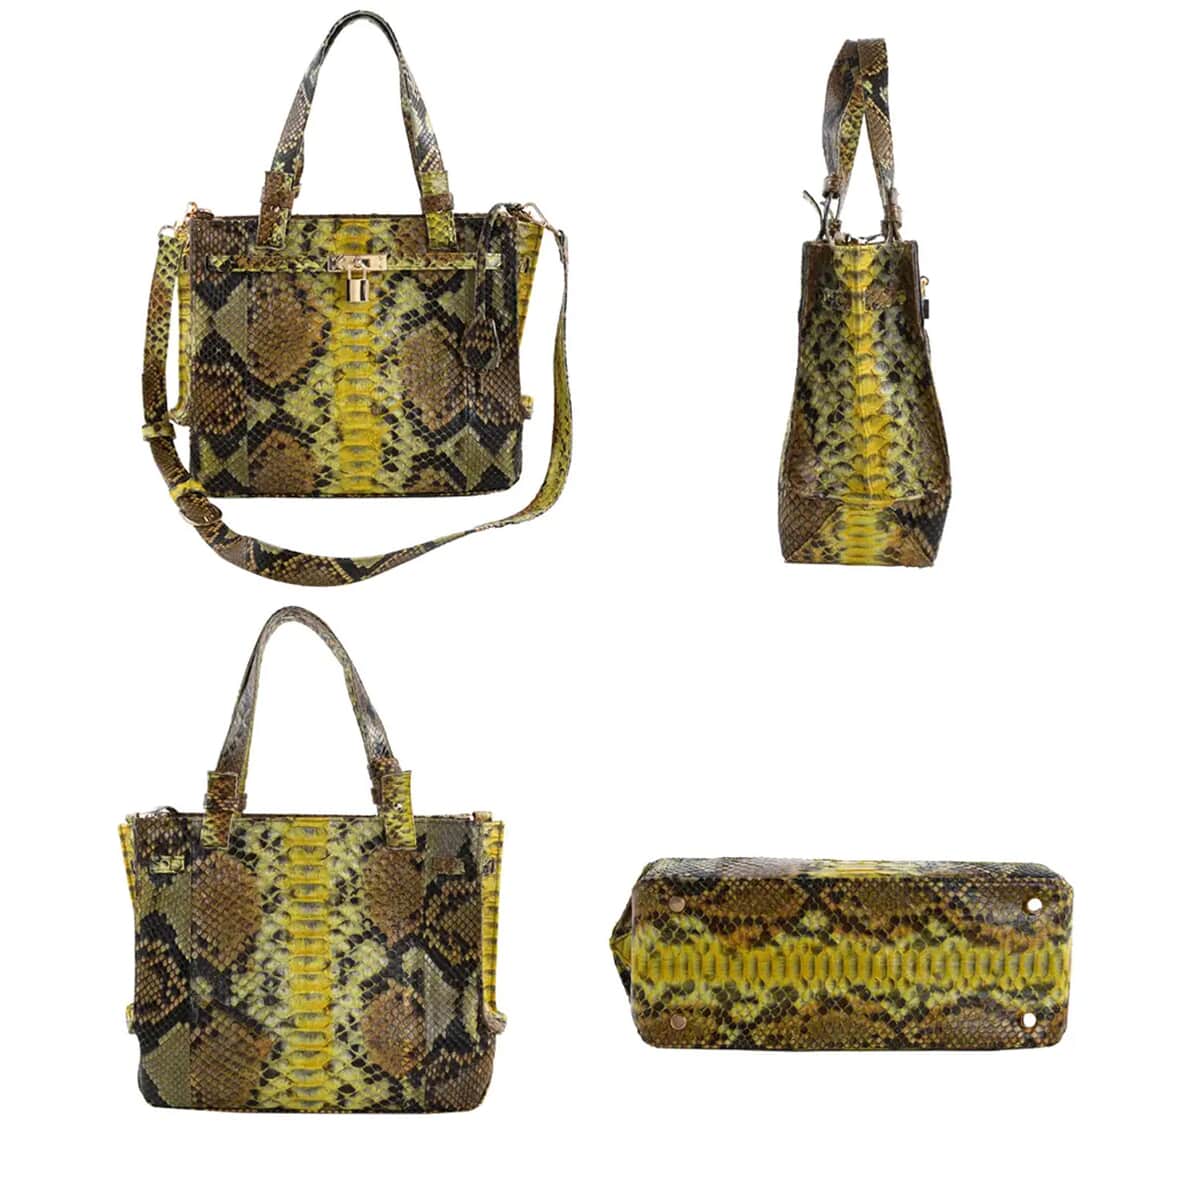 The Pelle Python Collection Handmade 100% Genuine Python Leather Yellow & Brown Tote Bag (12"x10"x4.5") image number 4